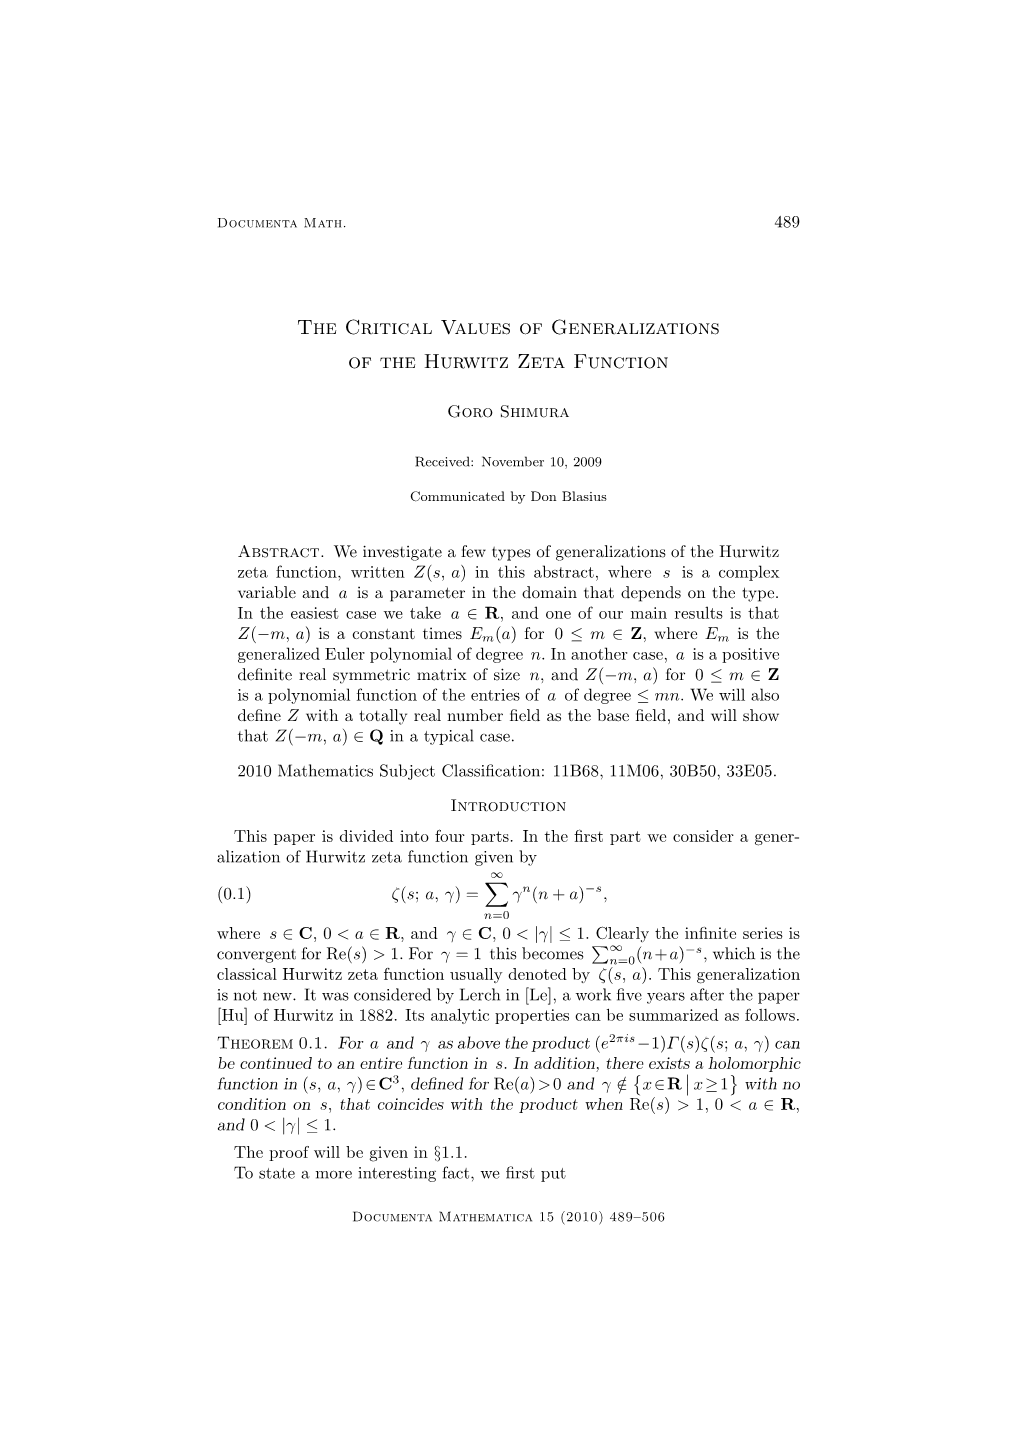 The Critical Values of Generalizations of the Hurwitz Zeta Function